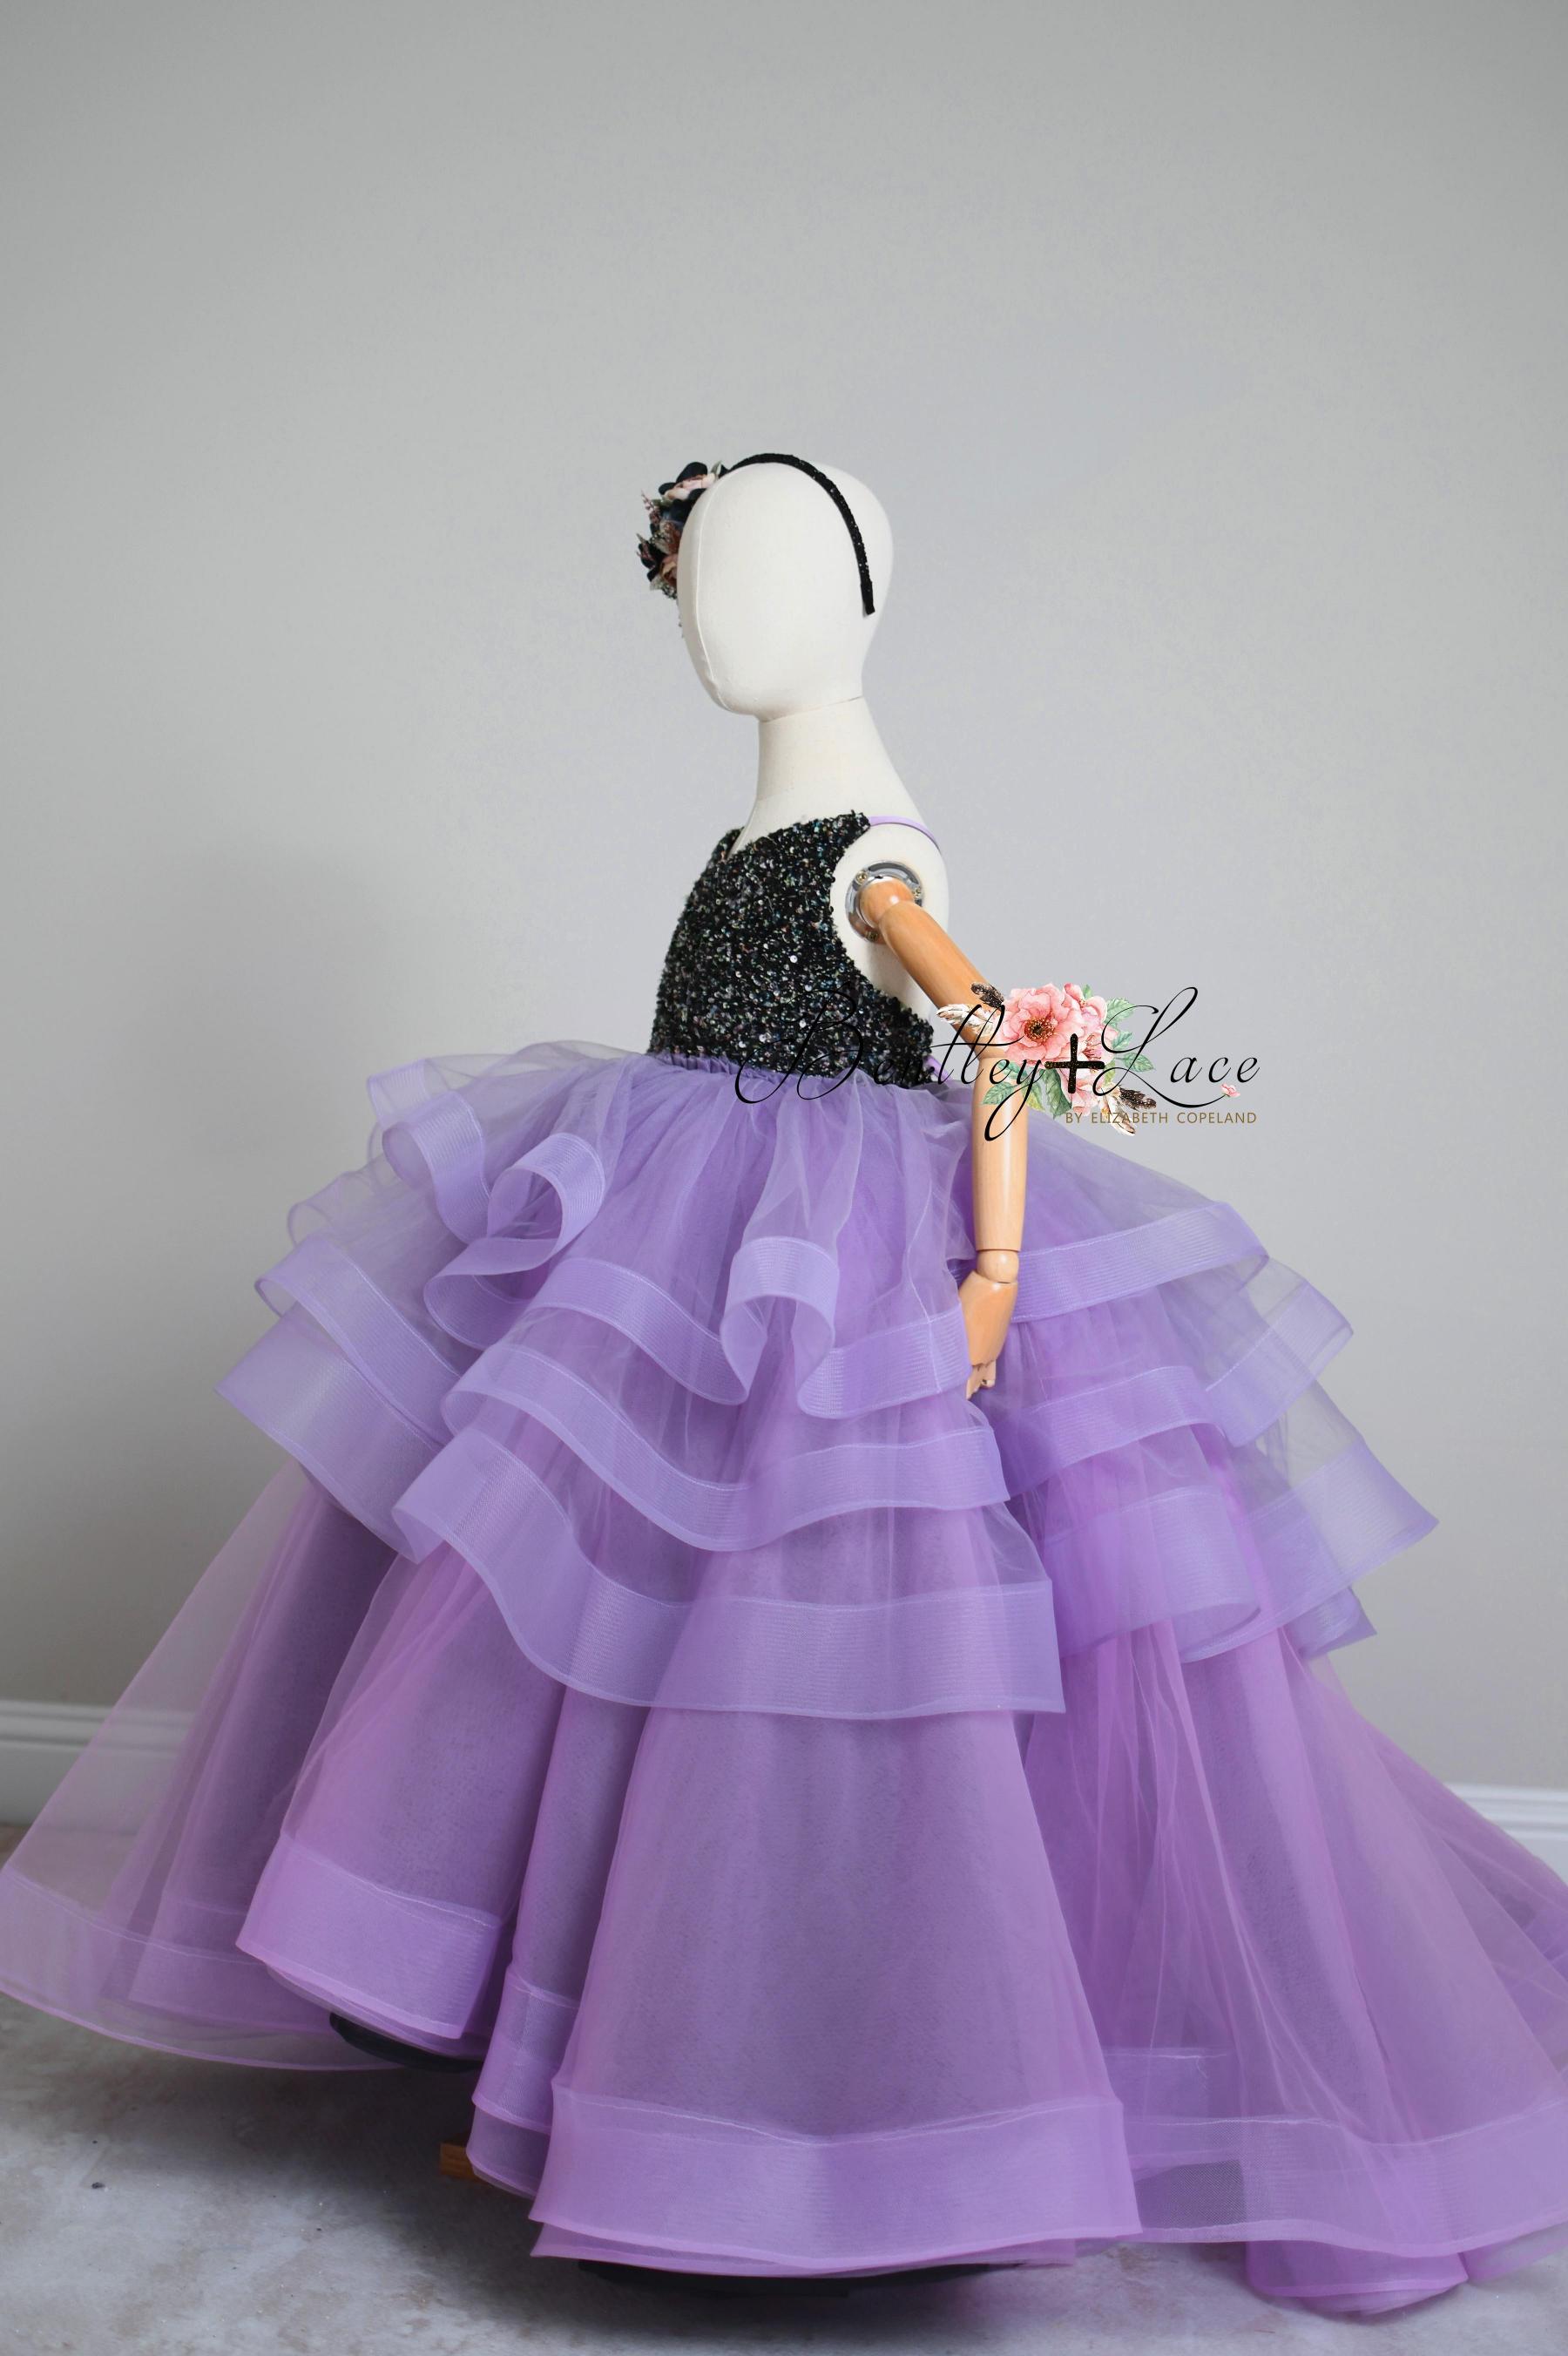 Taylor Swift-inspired gown - Unique, stylish, and custom-made dresses for fans and special events. Nationwide shipping available.